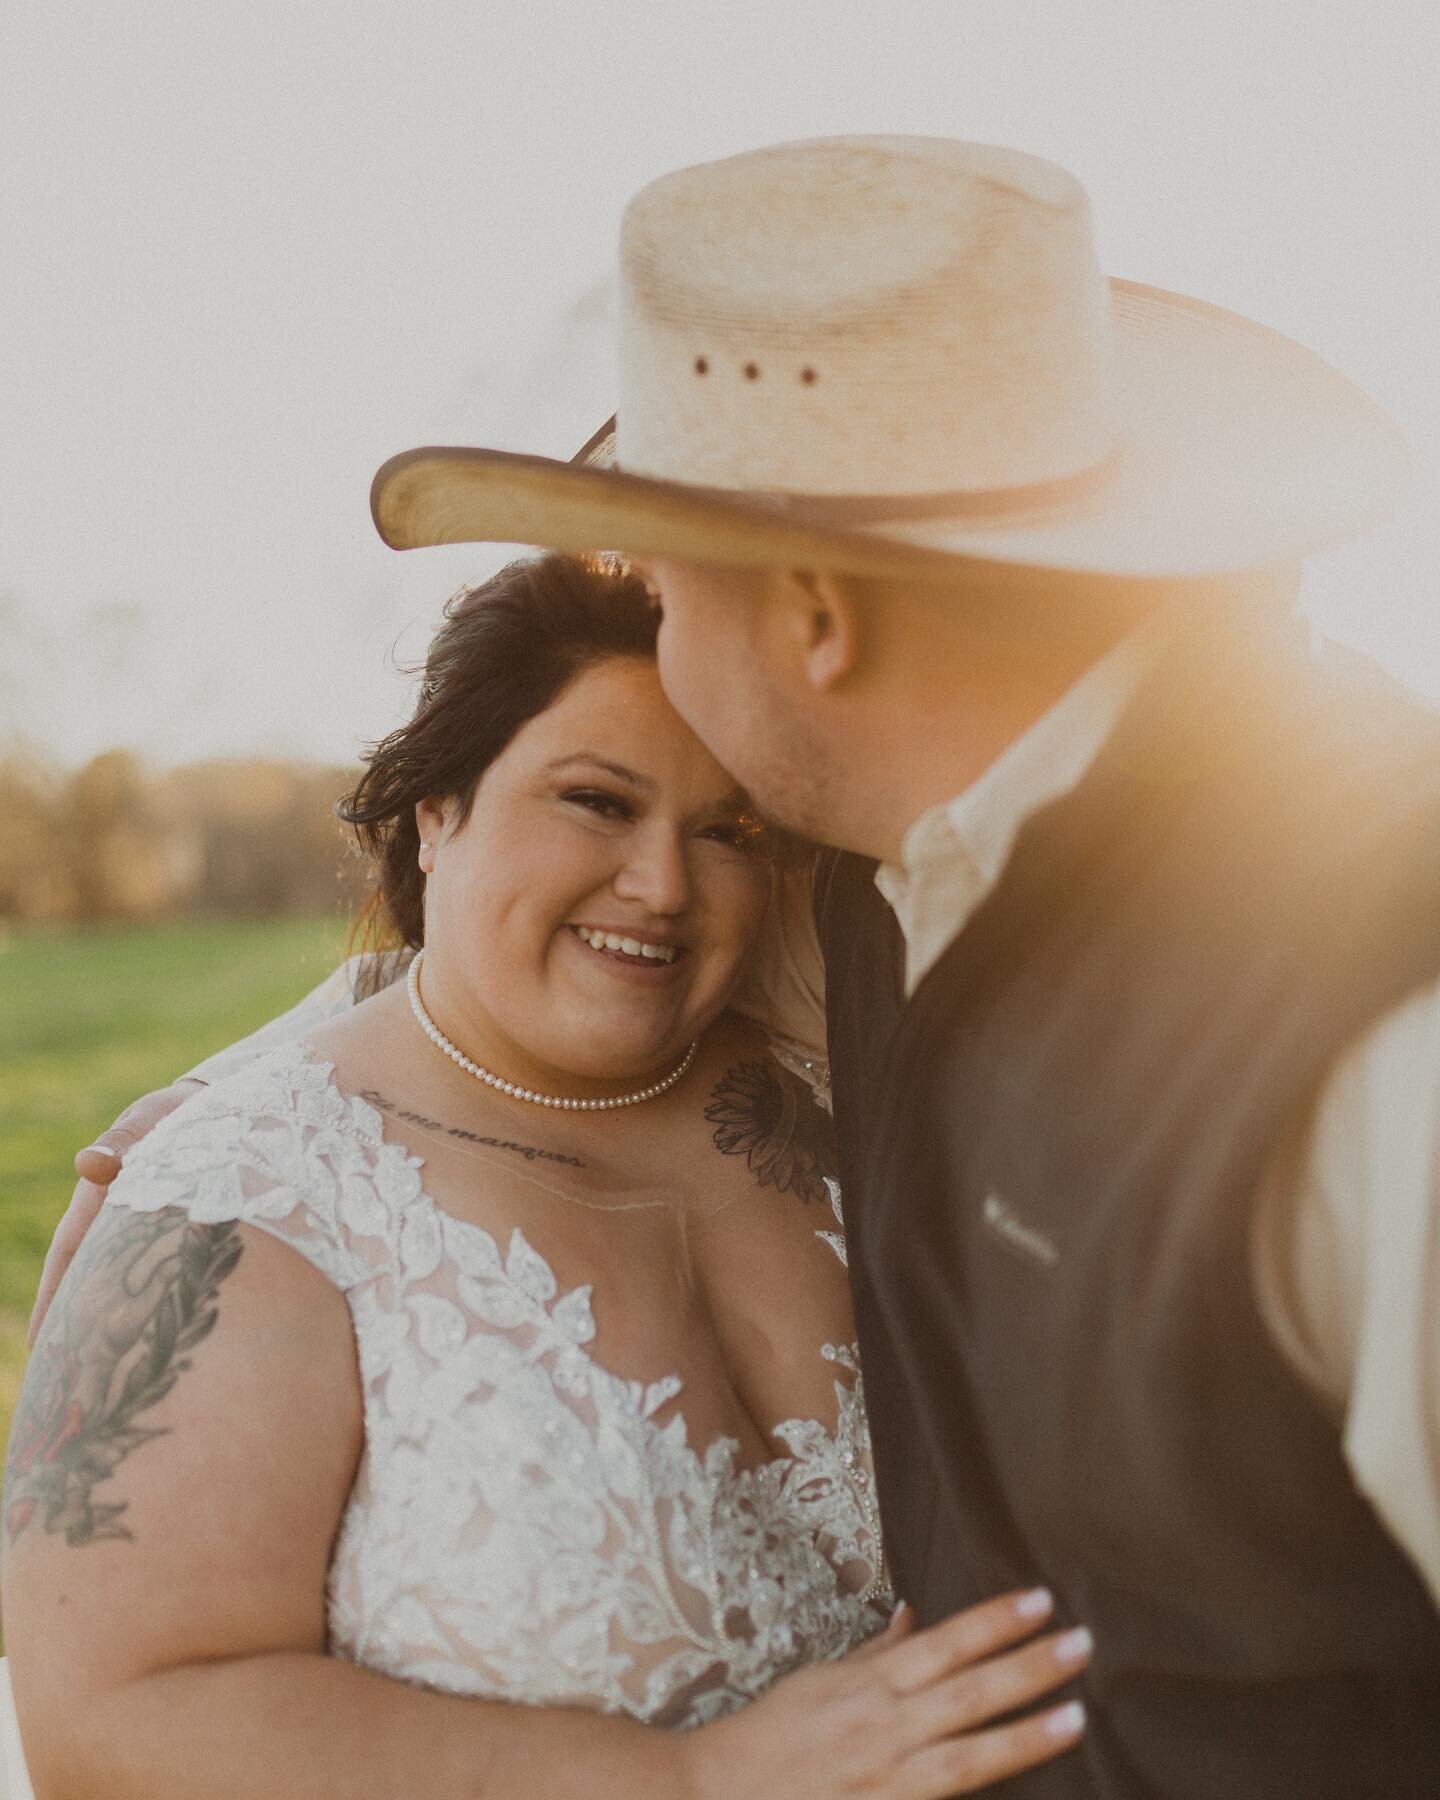 Love the southern vibes of this wedding 🤠 I&rsquo;m a firm believer that your wedding day should look exactly how you want it to, want 500 people there? Do it. Just you two? Go for it. It is 2021, you should make your day a reflection of your love ?